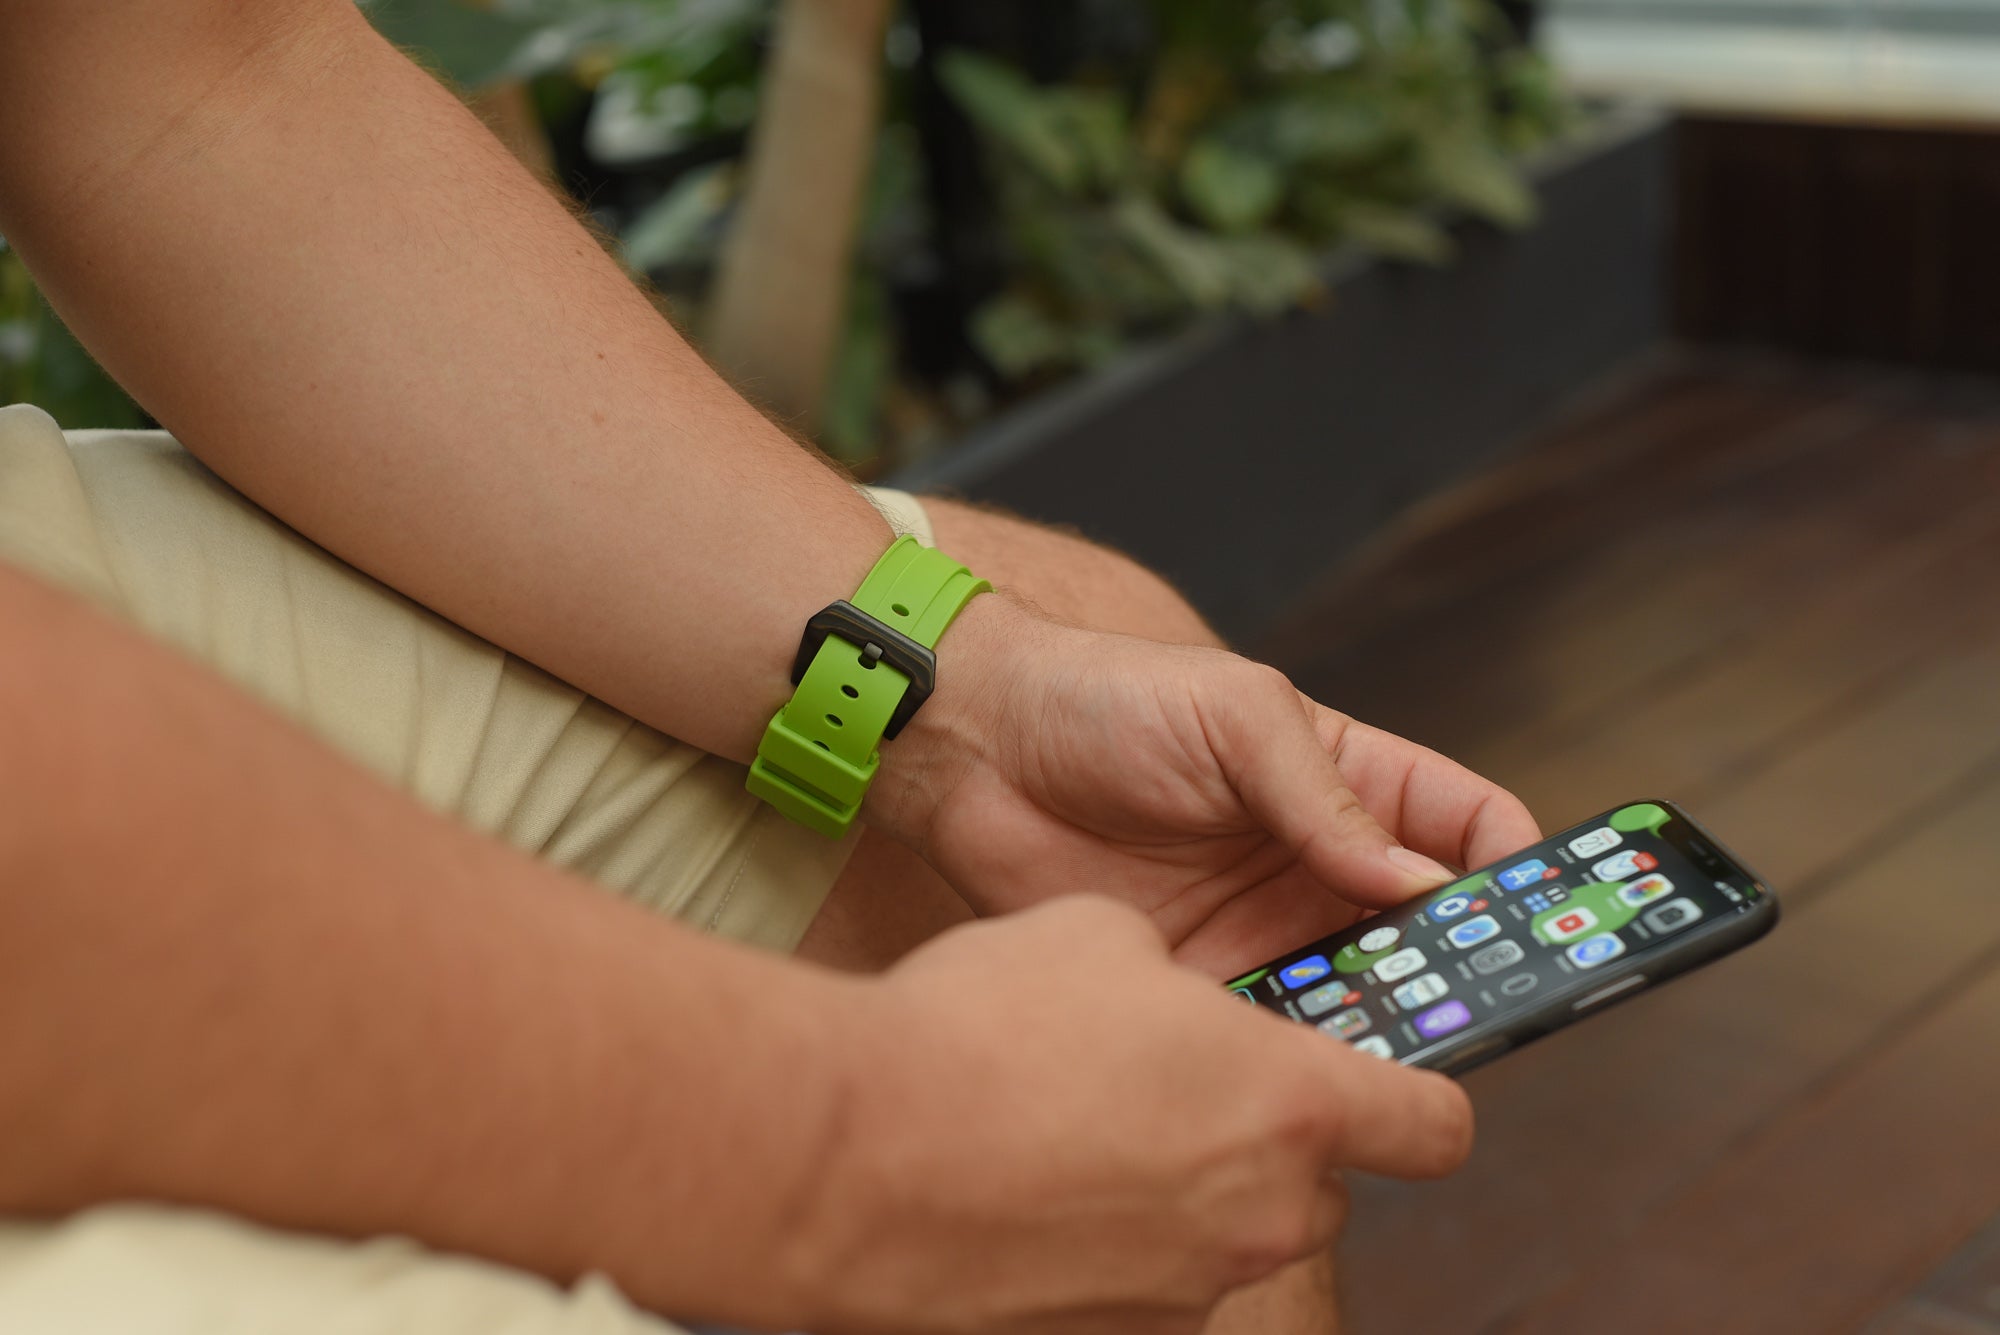 Electric Green Rubber Apple Watch Strap - Apple Watch Strap - Le Luxe Straps